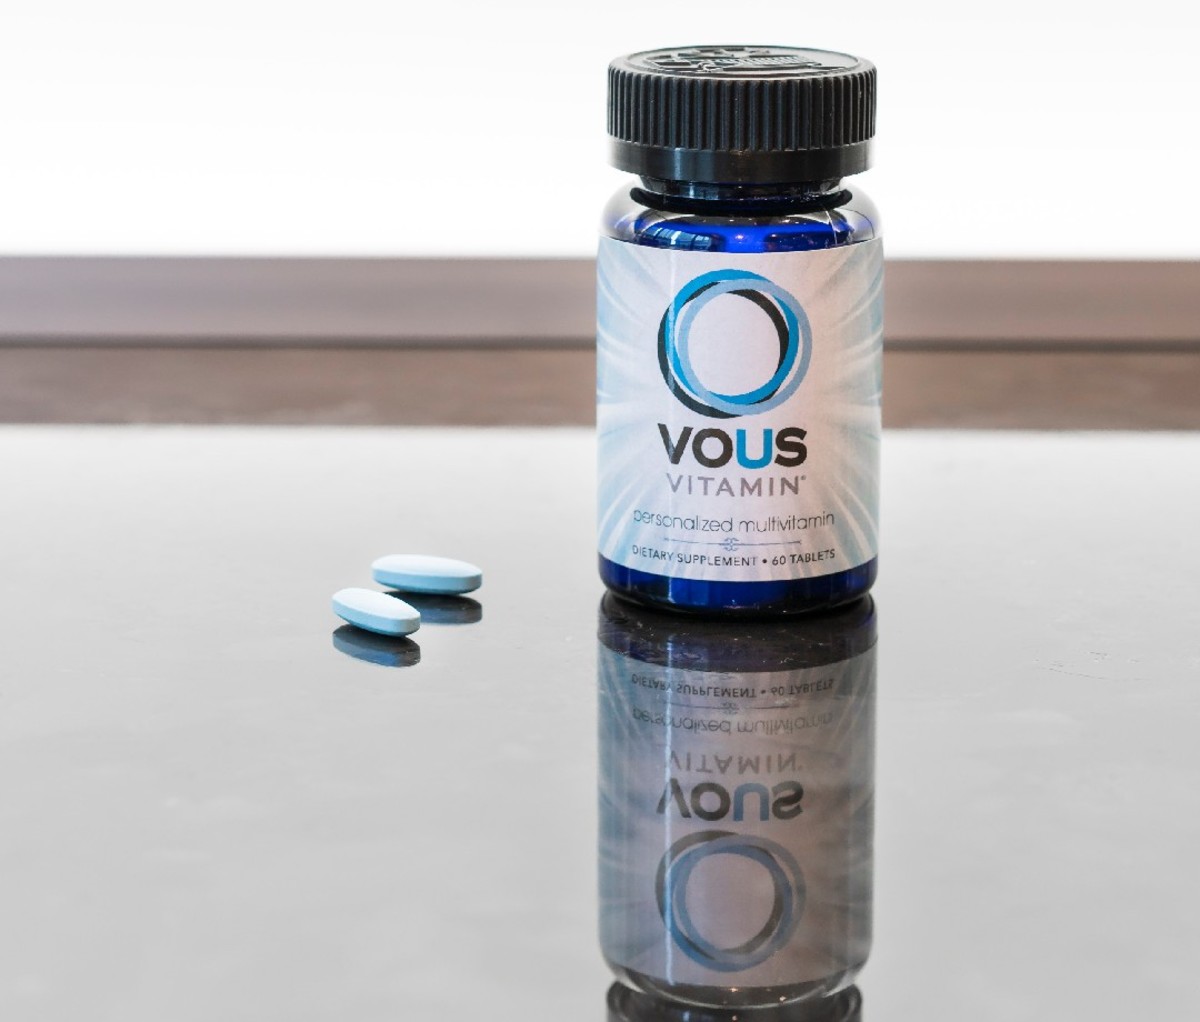 Vous Vitamin bottle on a glass table beside two light blue vitamin pills/supplements